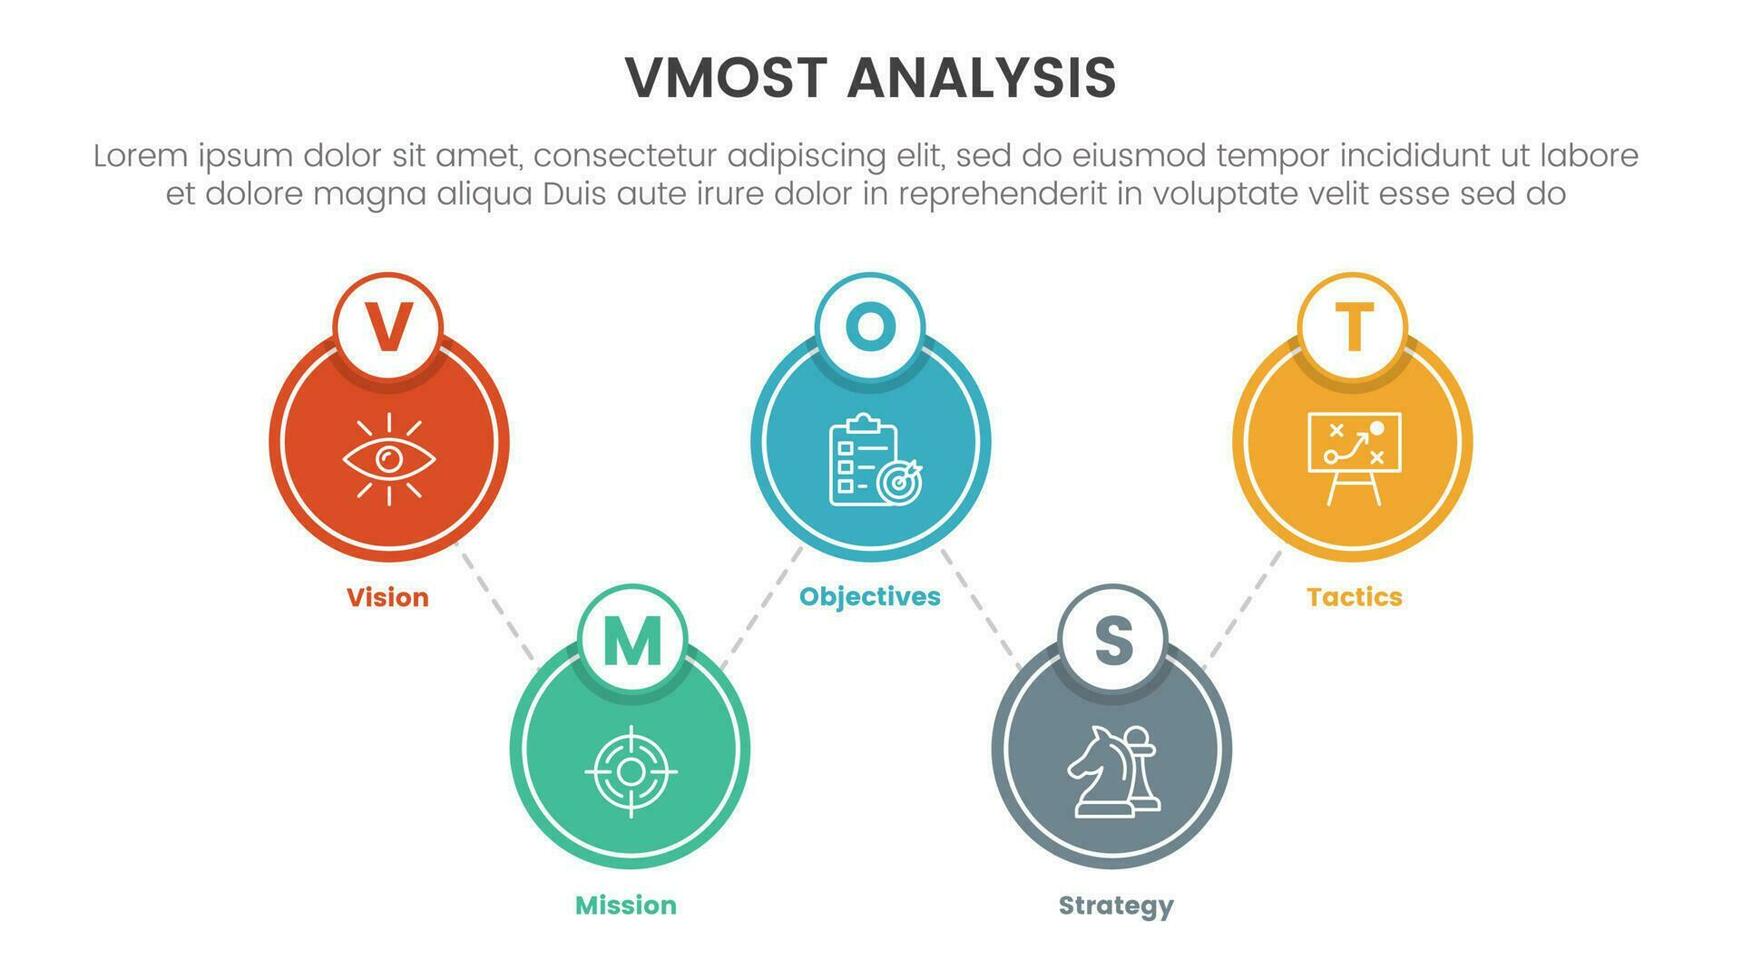 vmost analysis model framework infographic 5 point stage template with big circle spreading balance information concept for slide presentation vector